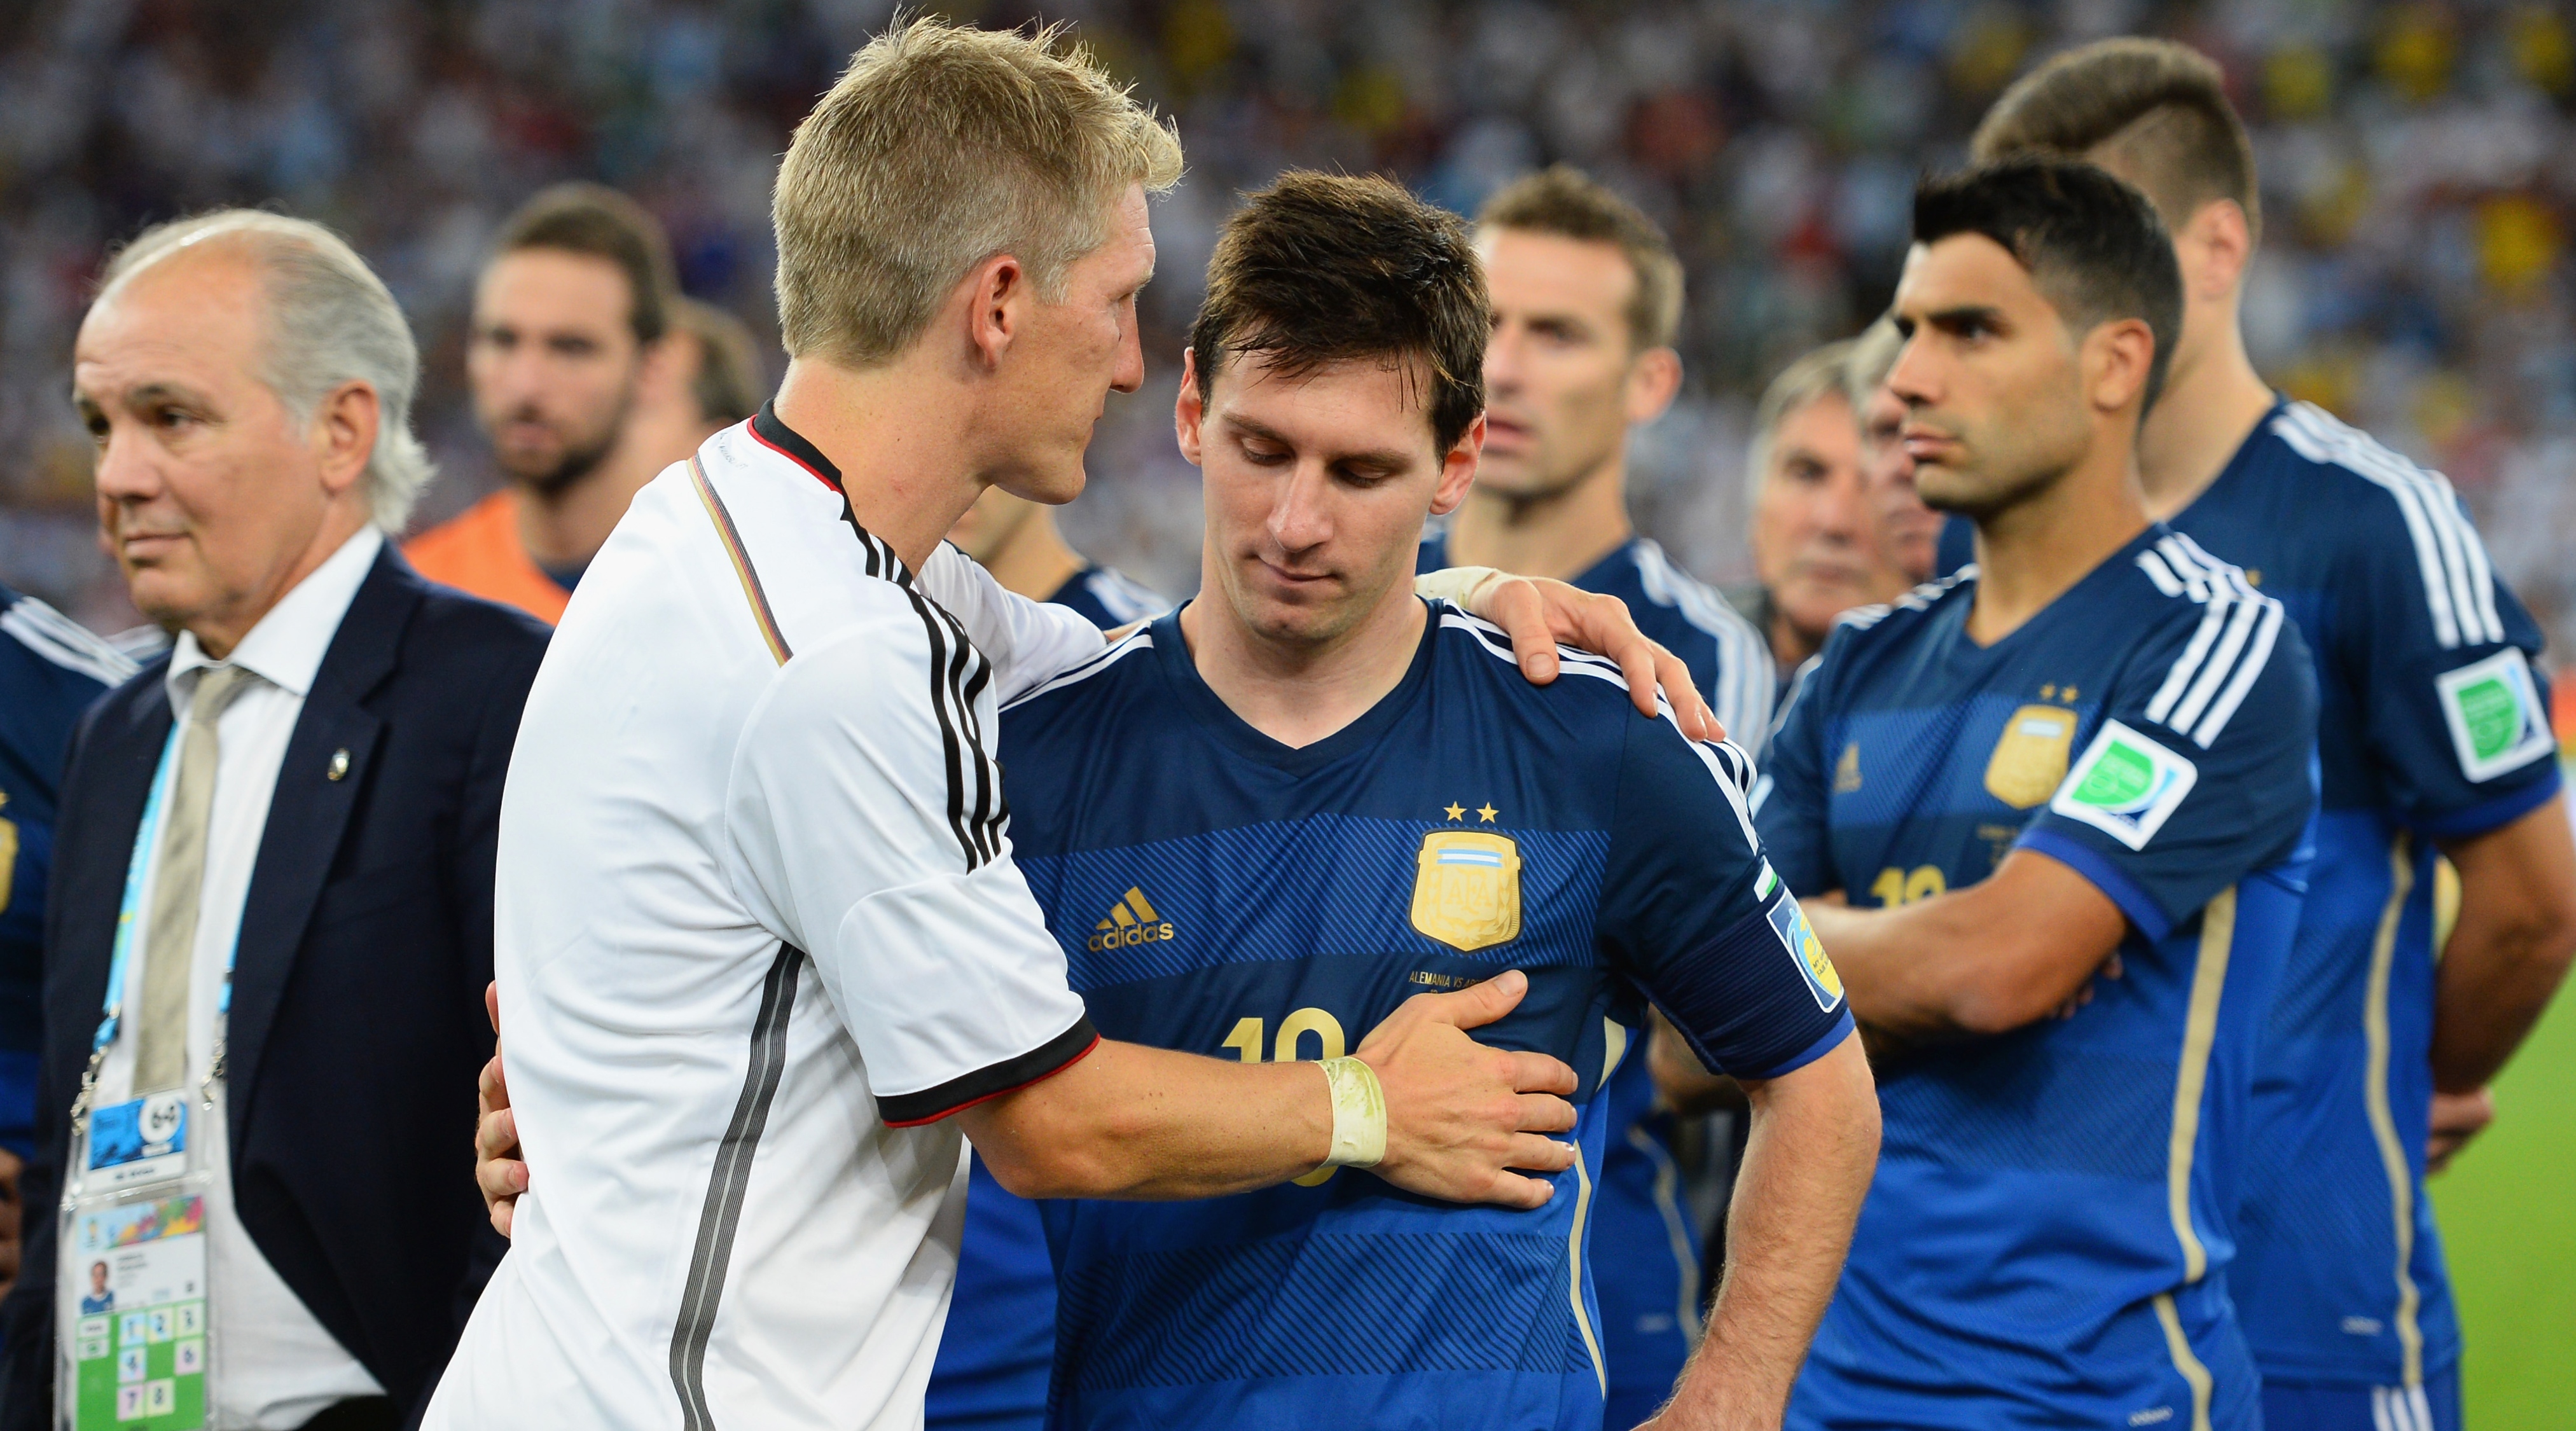 Bastian Schweinsteiger of Germany comforts Lionel Messi of Argentina after Germany's 1-0 win in extra time during the 2014 FIFA World Cup Brazil Final between Germany and Argentina at Maracana on July 13, 2014 in Rio de Janeiro, Brazil.